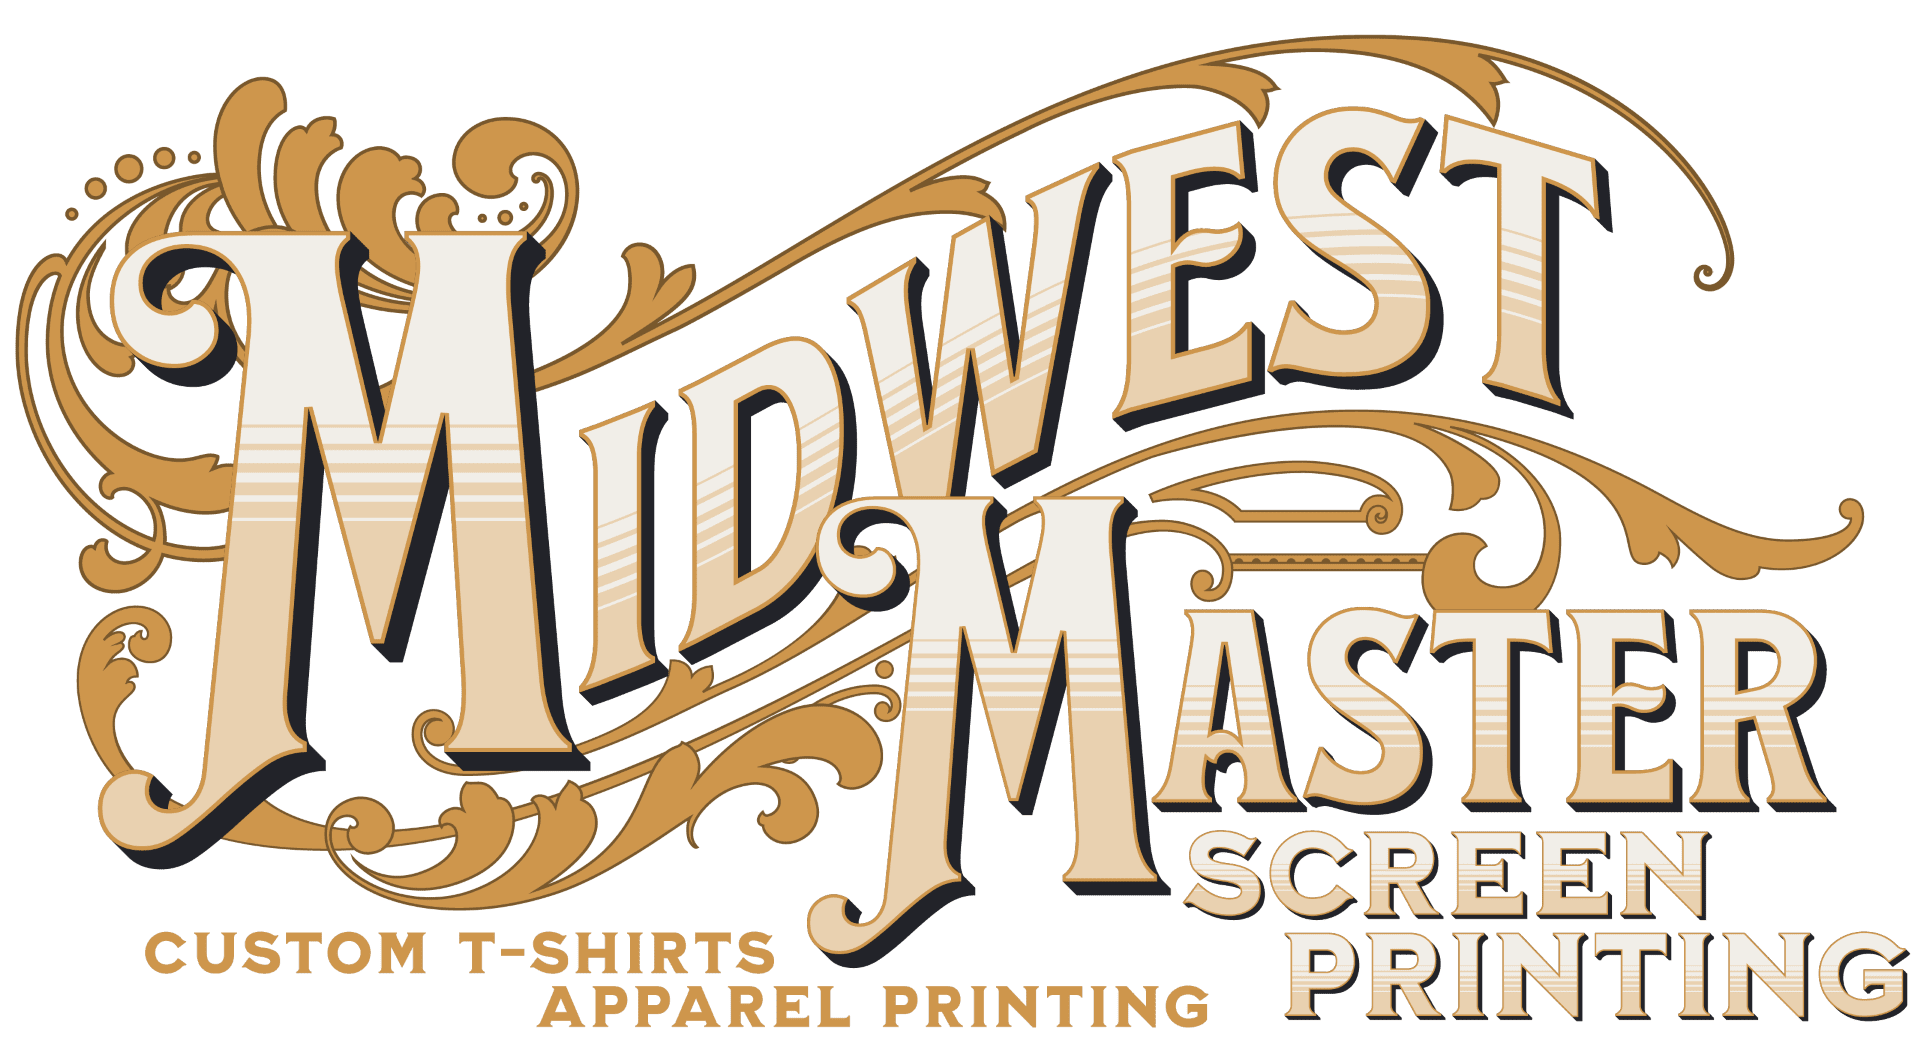 A logo for the midwest masters screen printing.